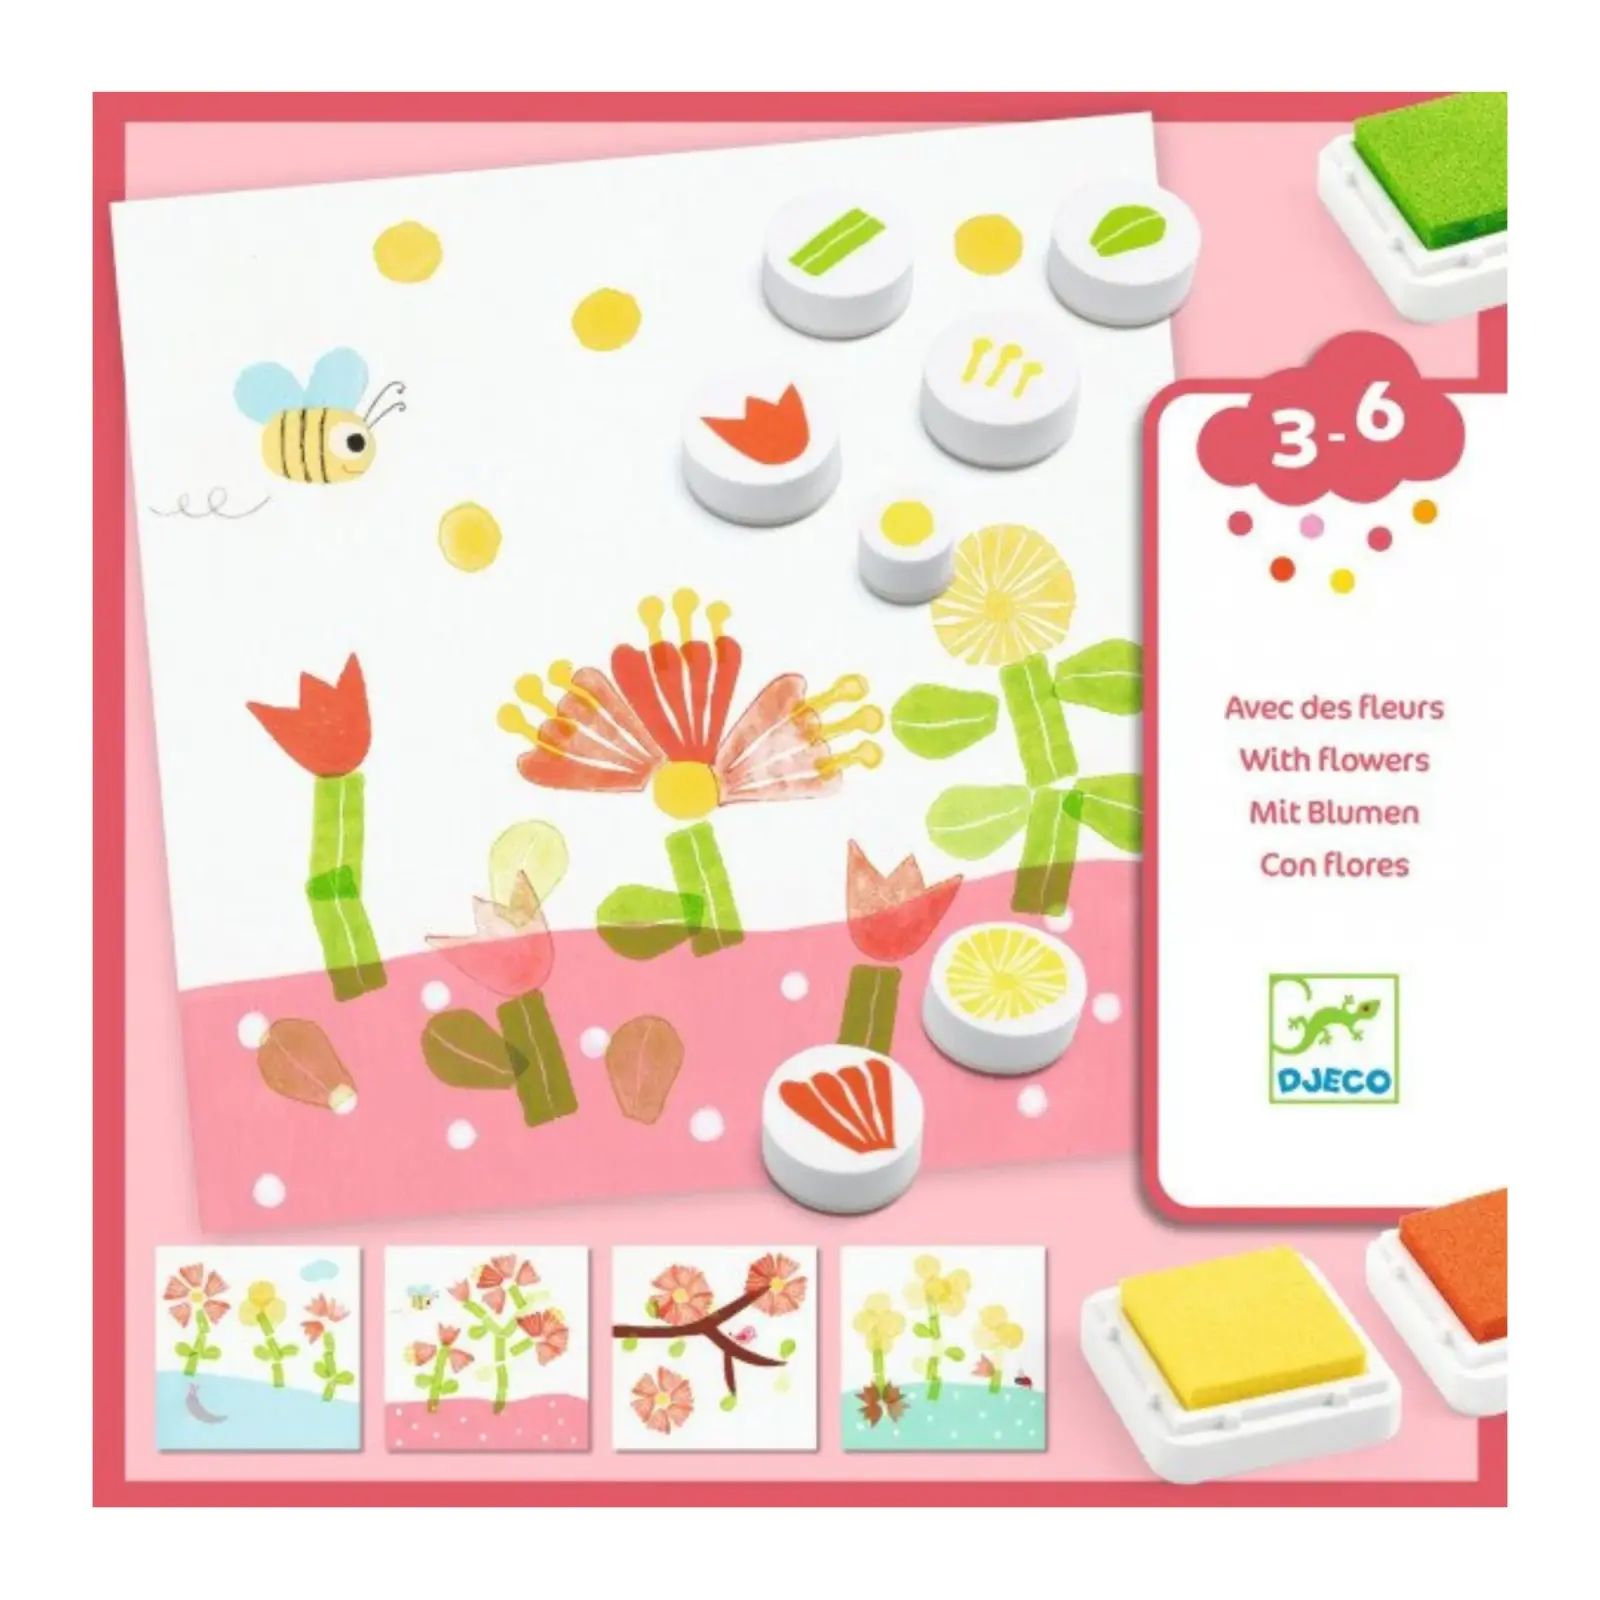 Djeco Little ones - Stamps With flowers